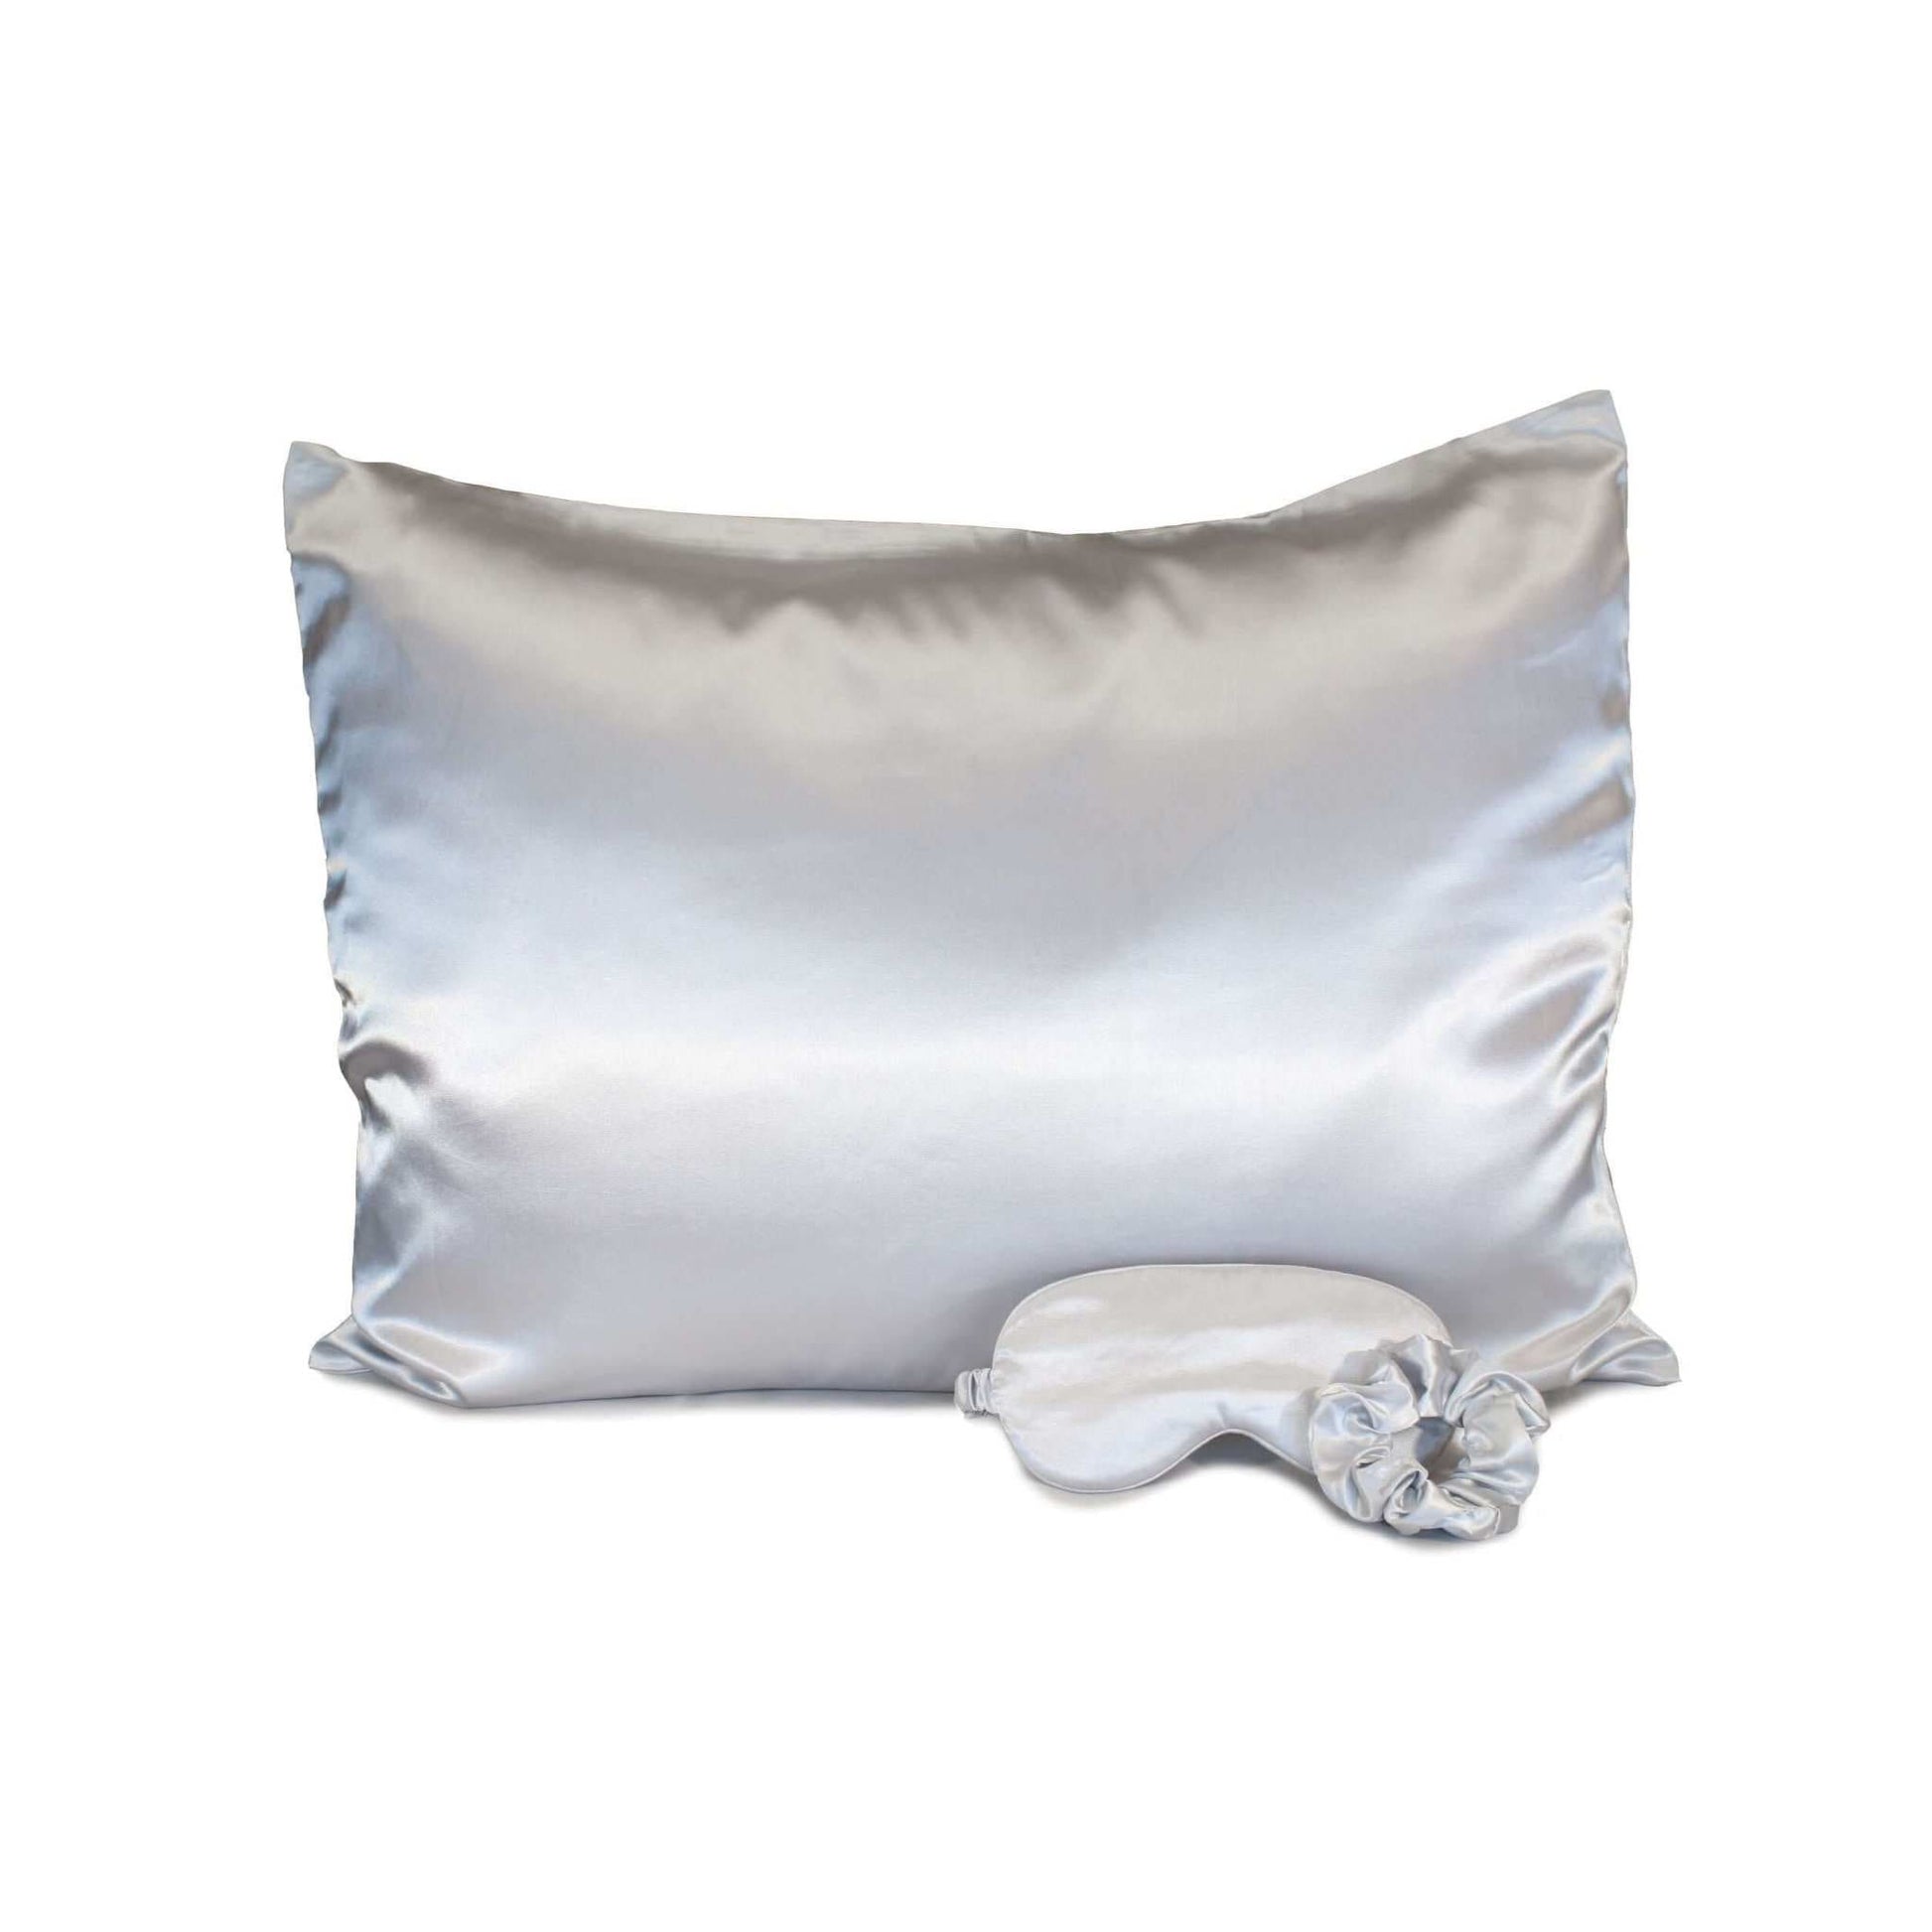 Elegant satin sleep set with soft pillow and sleep mask, perfect for a restful night's sleep.